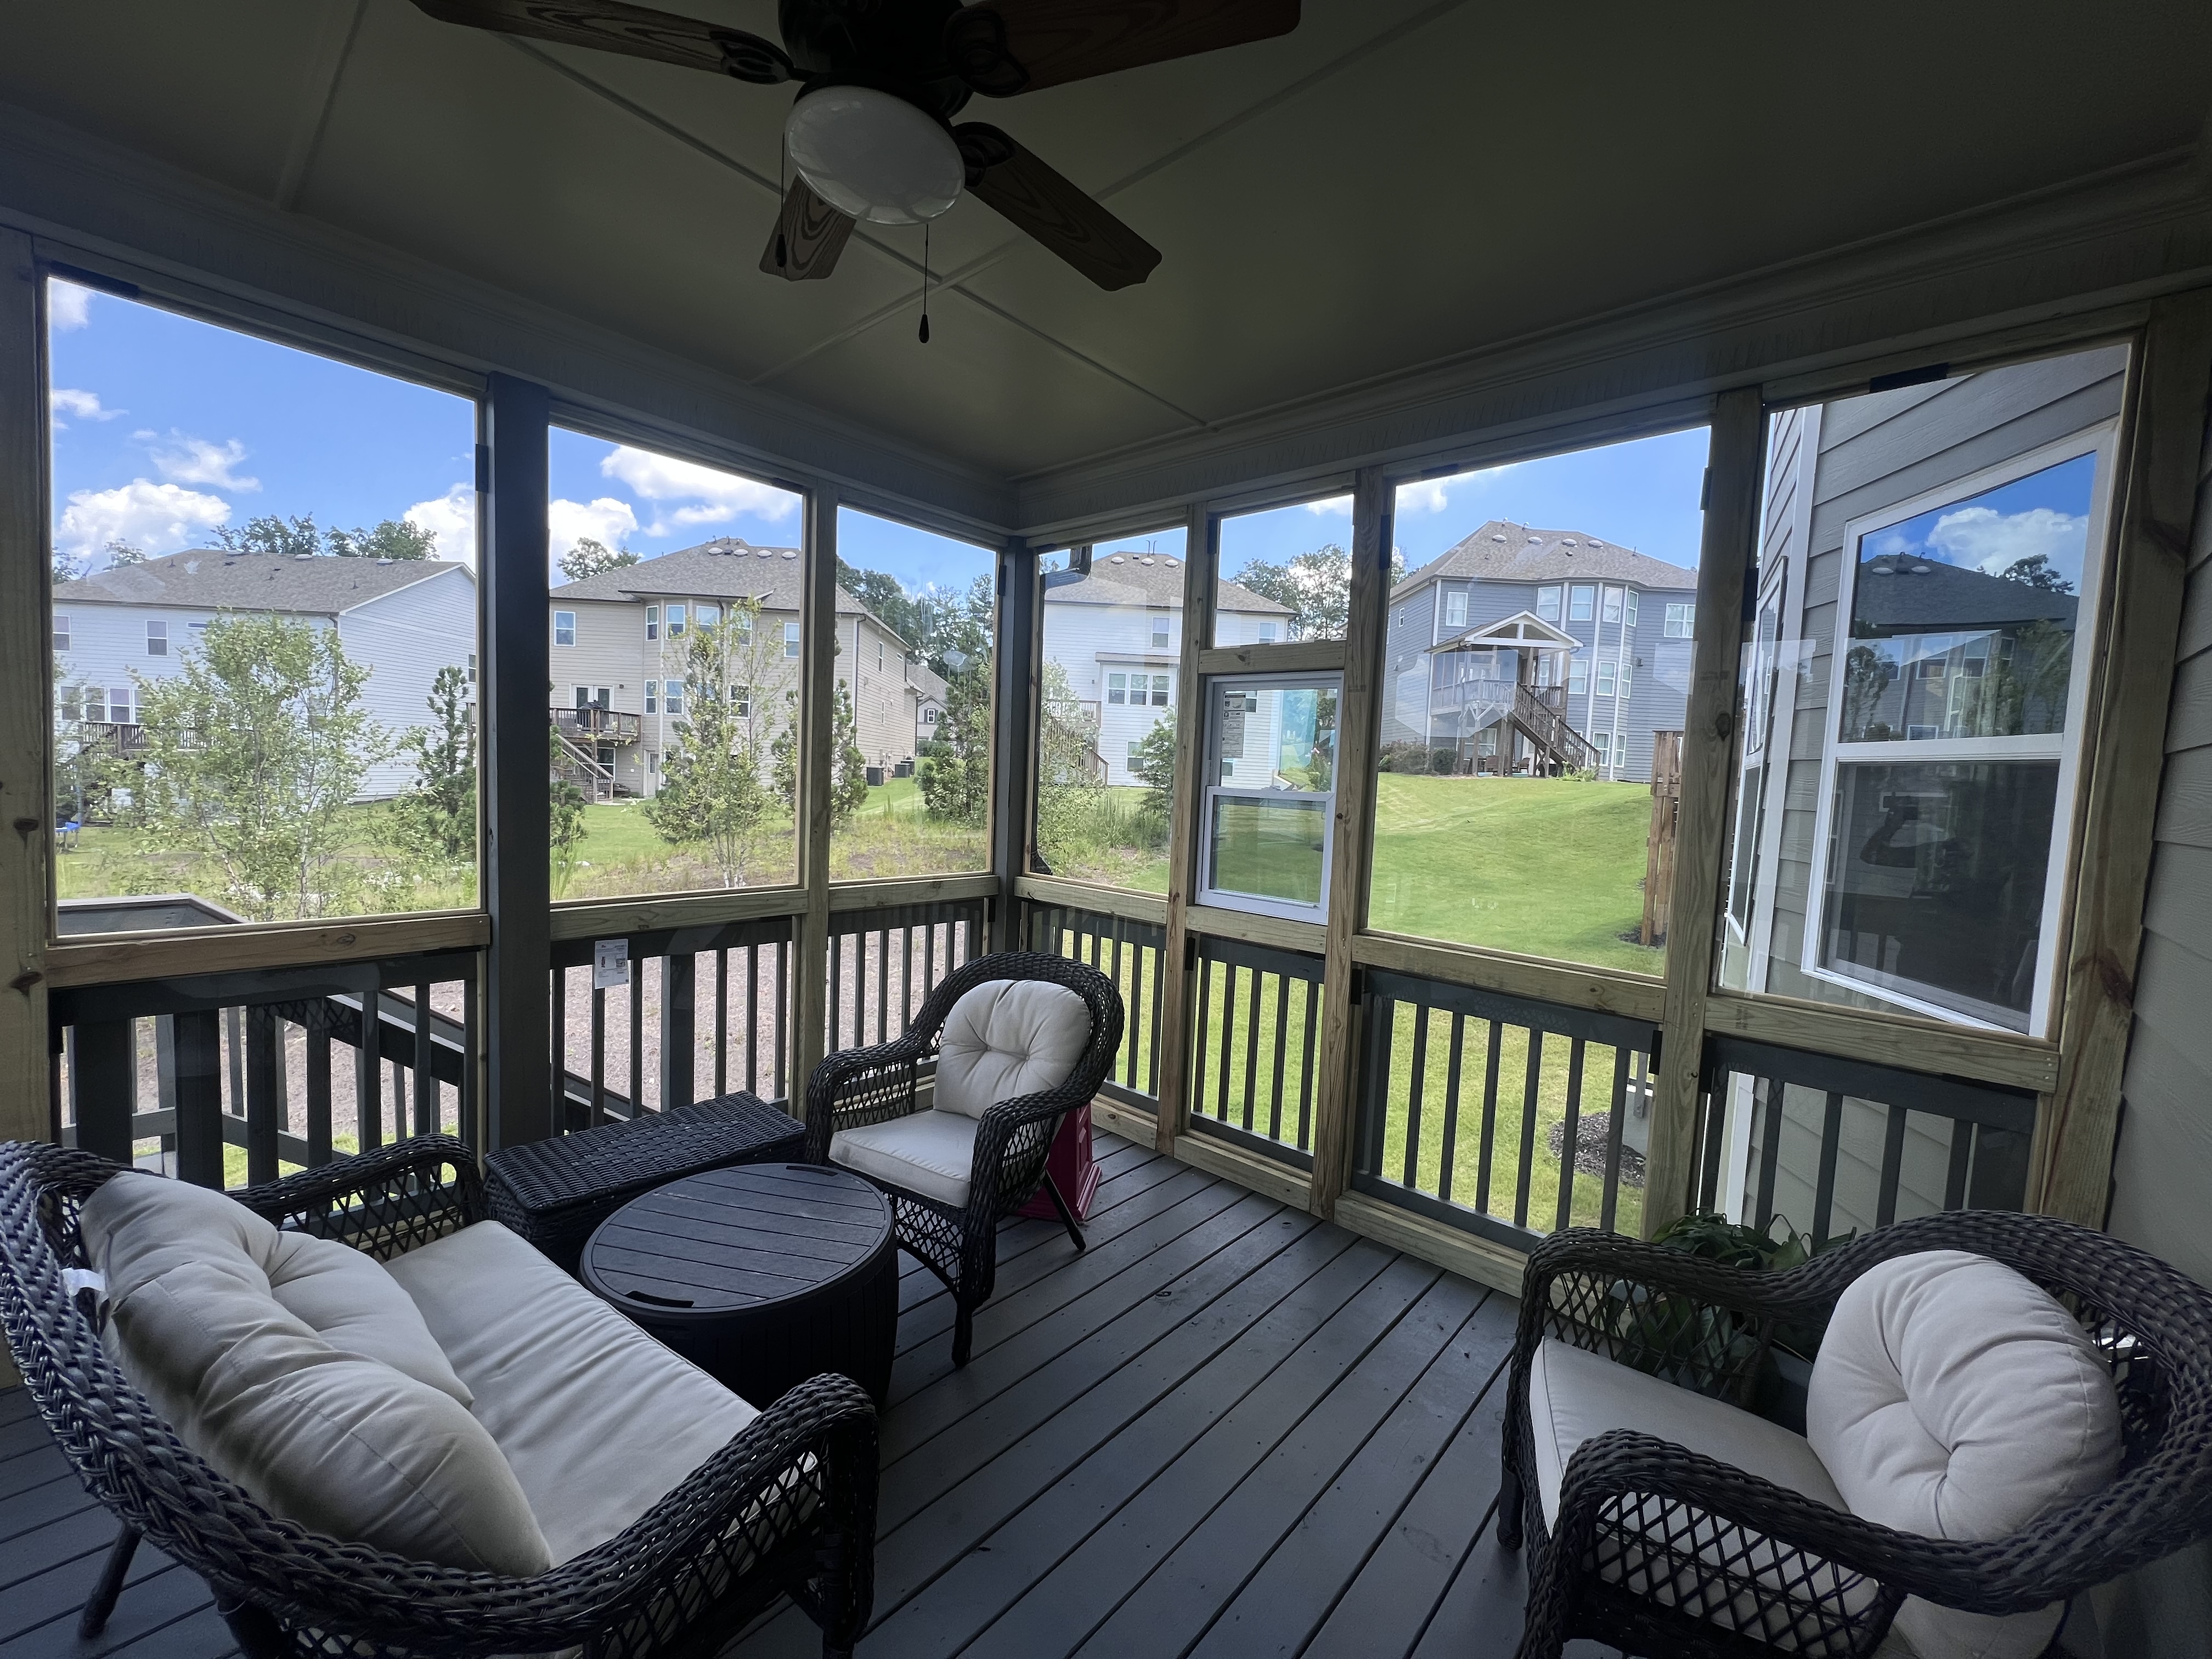 This back porch is enclosed with glass for a clear view of the gorgeous back yard!